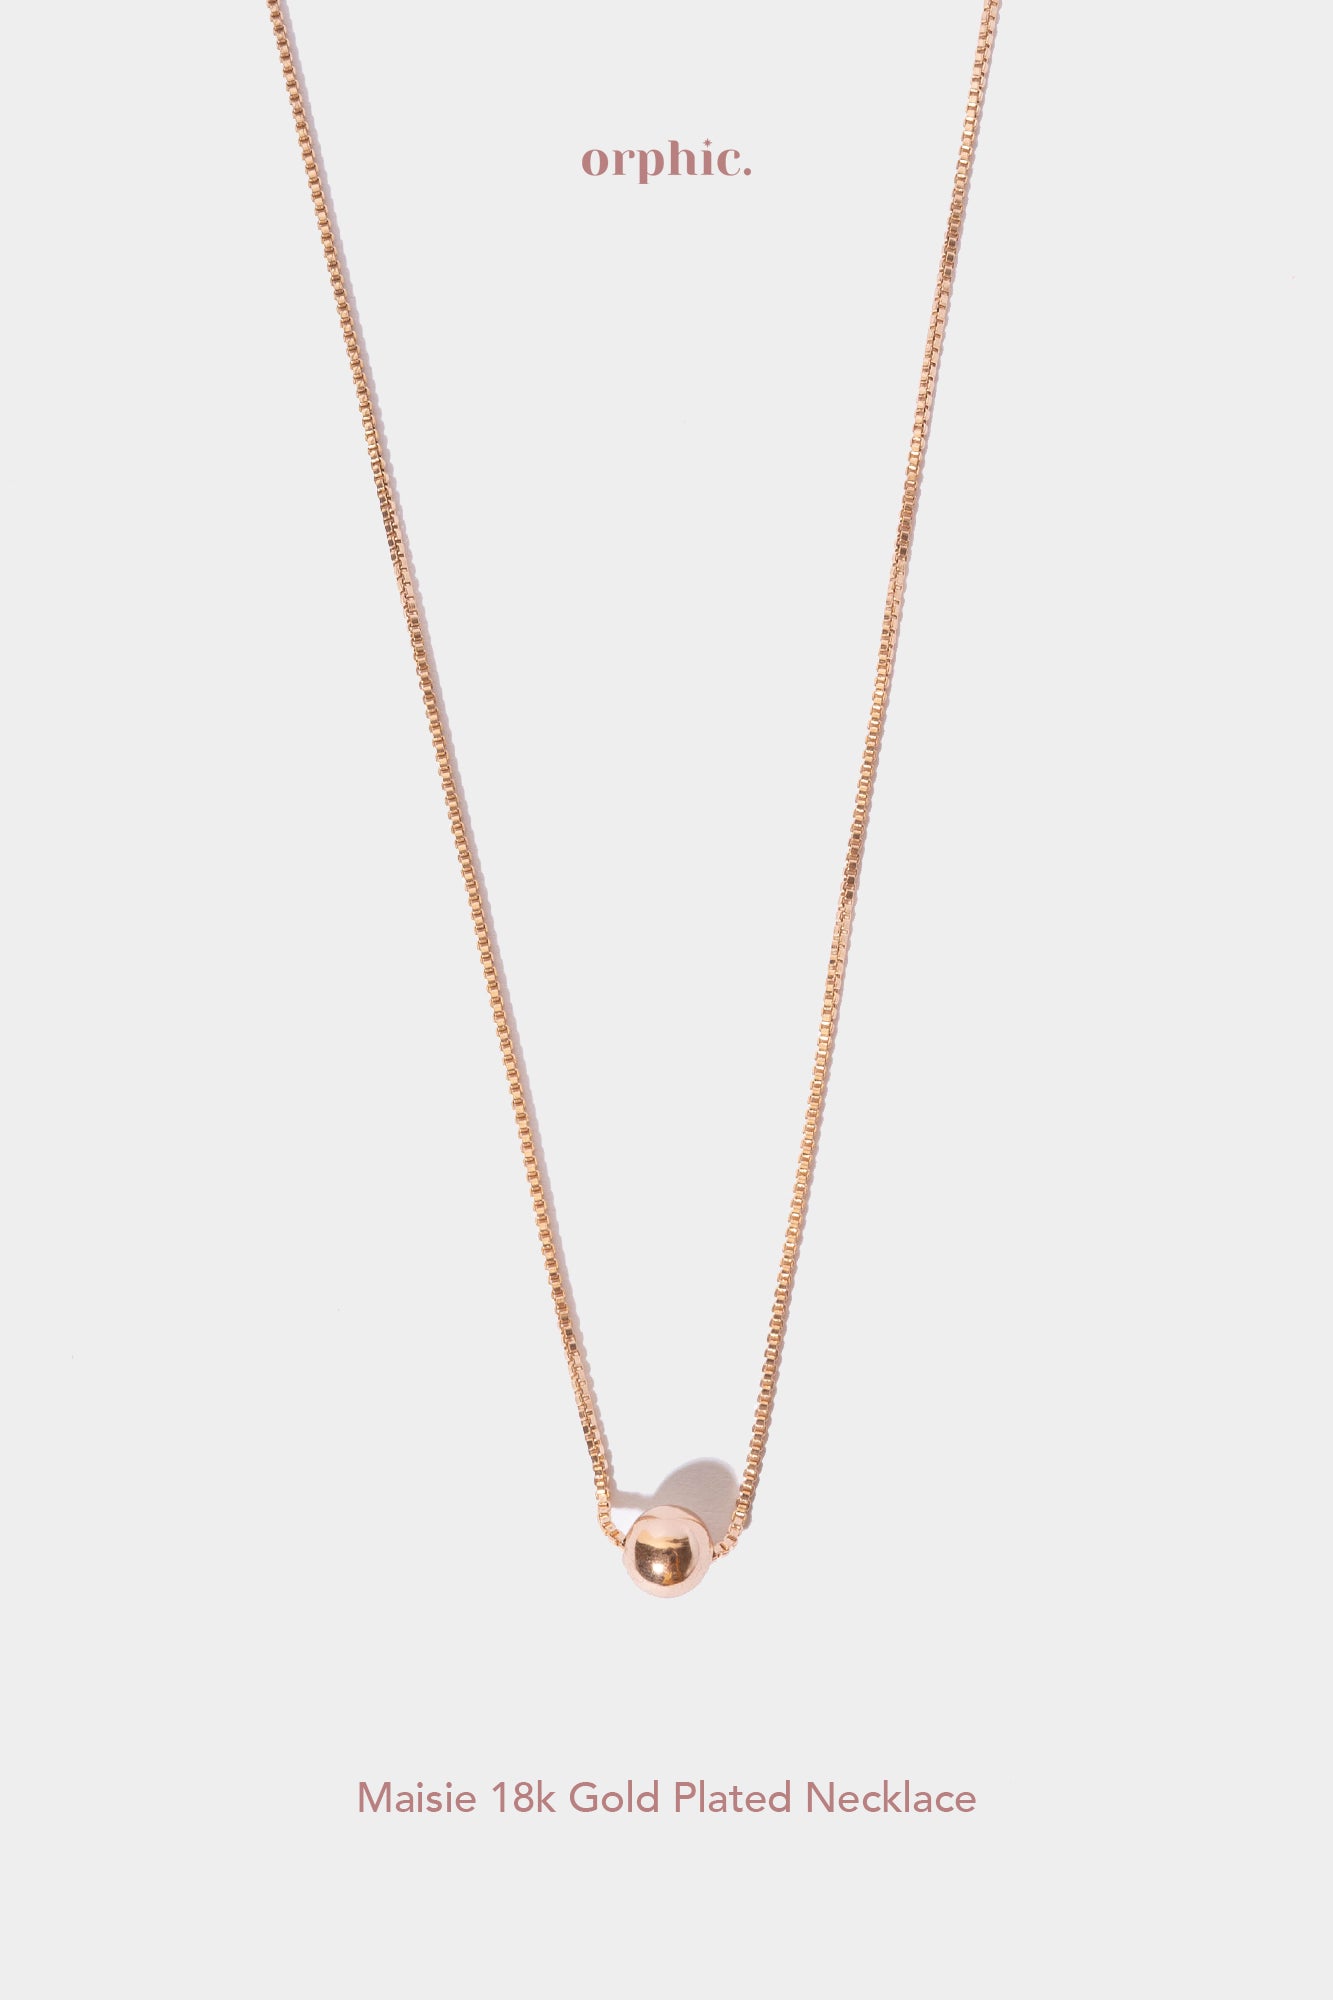 Maisie 18k Gold Plated Necklace